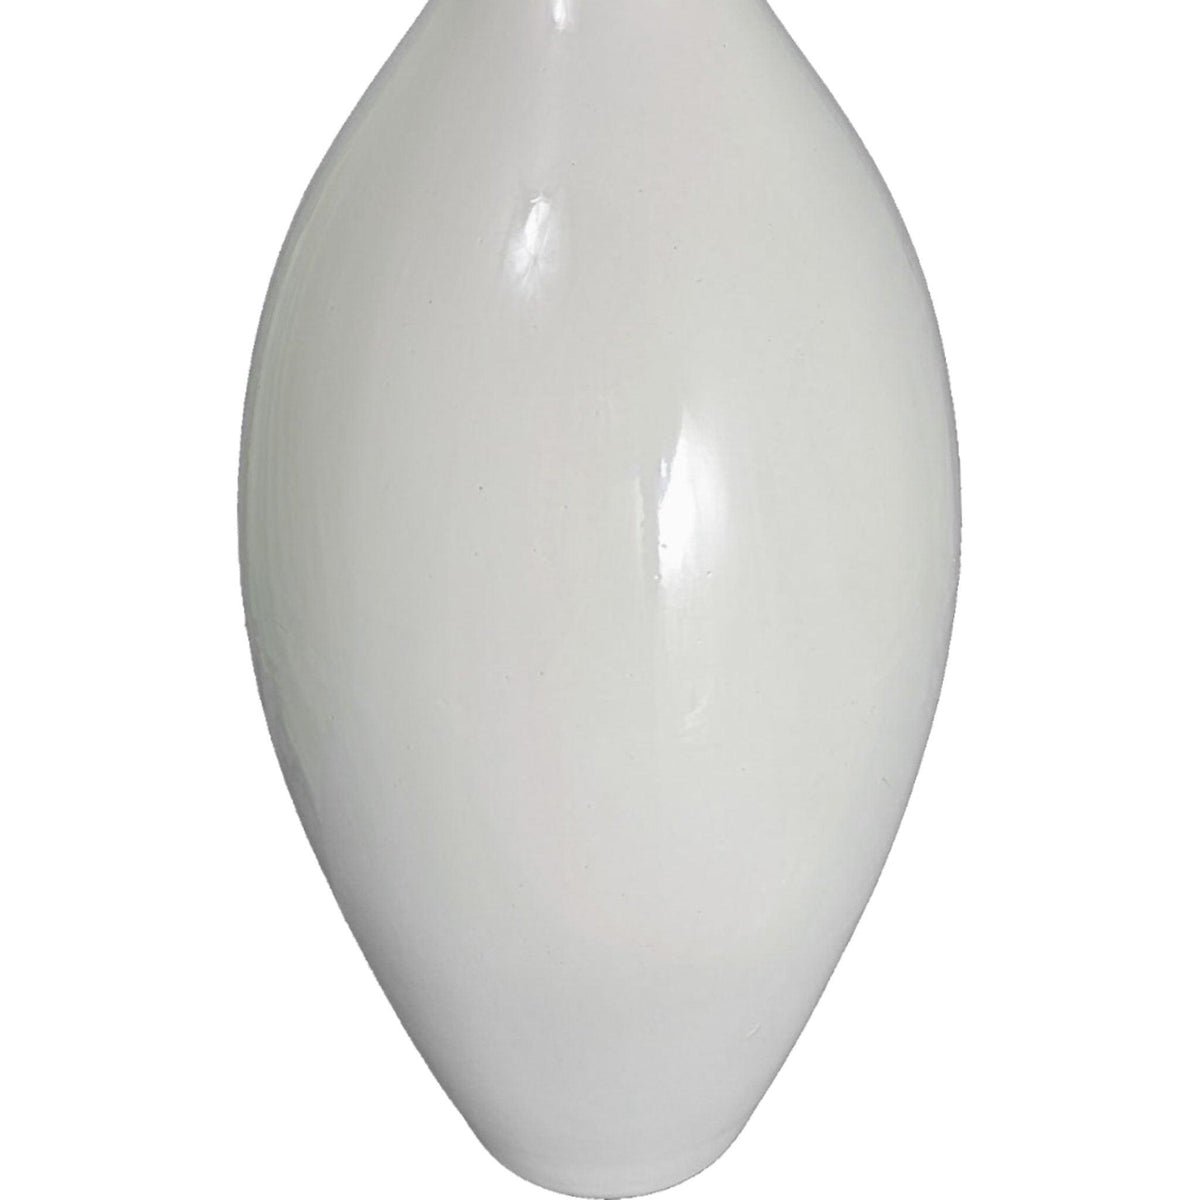 Lee Display's brand new 24in Roman Ceramic Vase comes in a high gloss white finish on sale at leedisplay.com